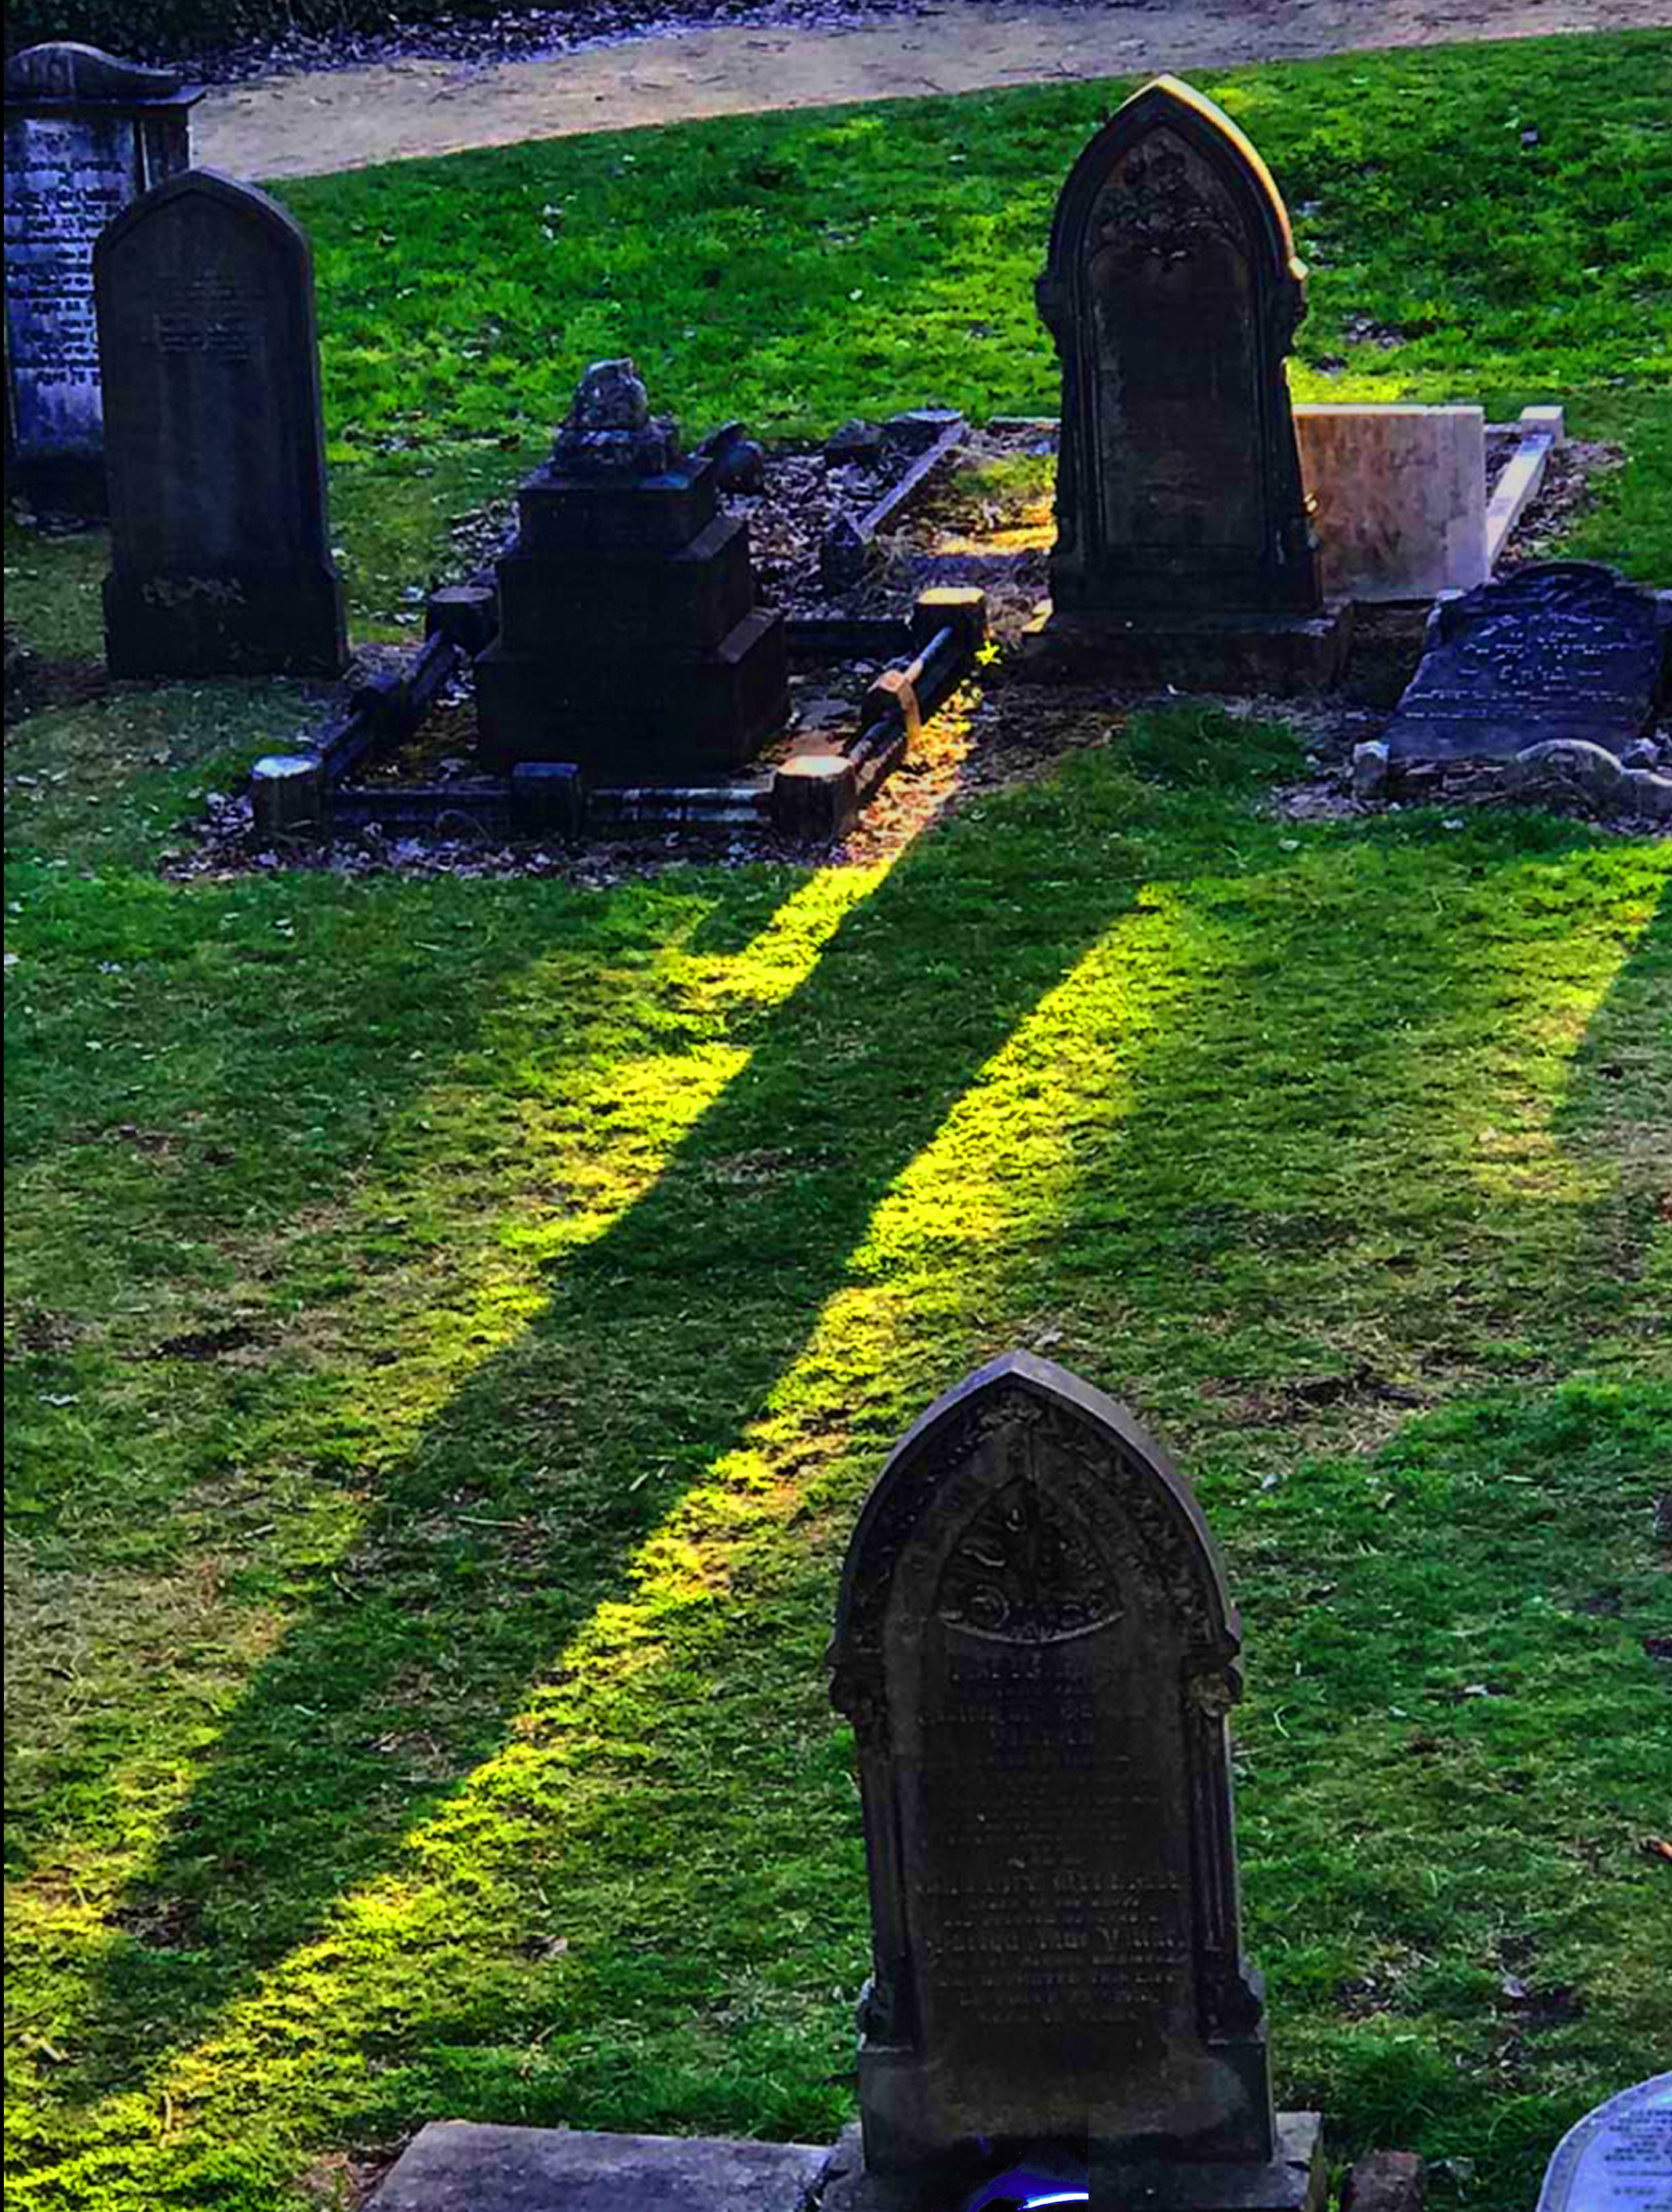 A photograph of headstones in a graveyard